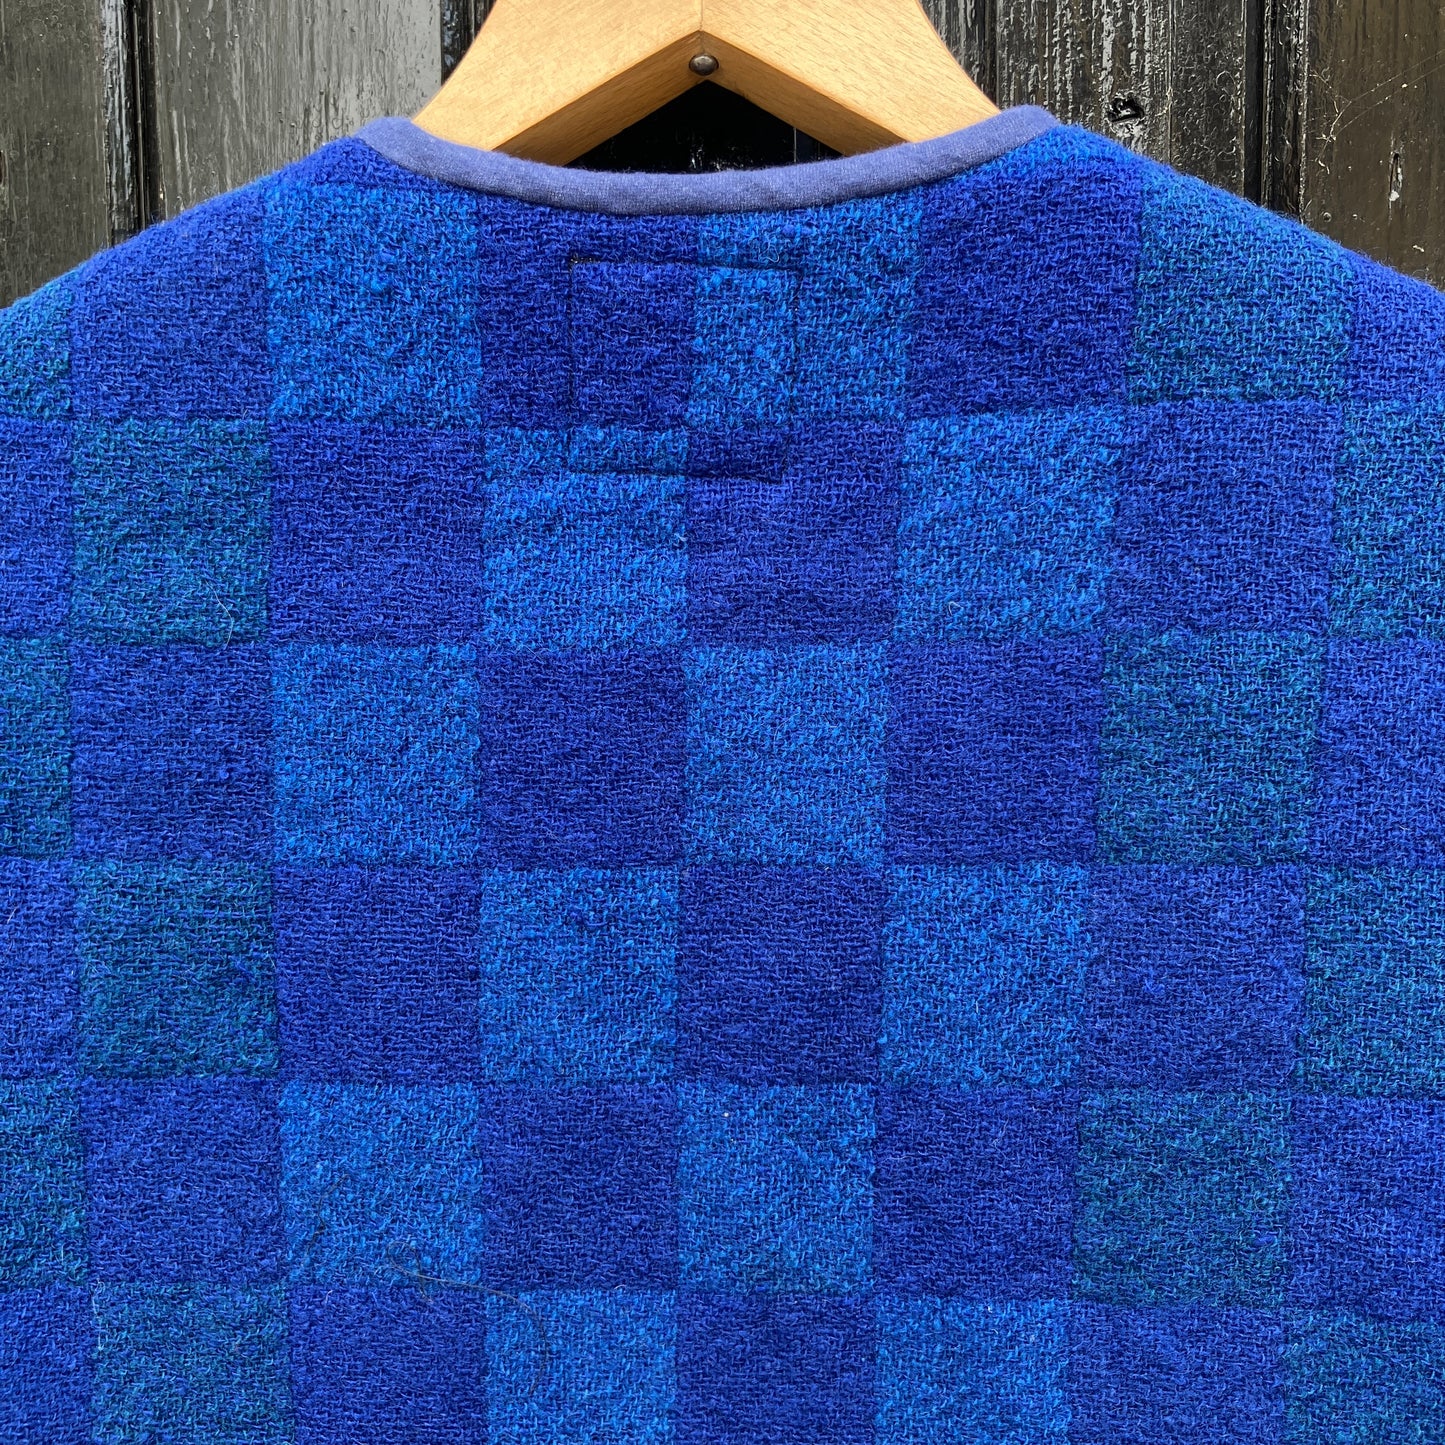 Vest/gilet/waistcoat made from a reclaimed blue checkerboard weave Irish wool Gaiety blanket - back view